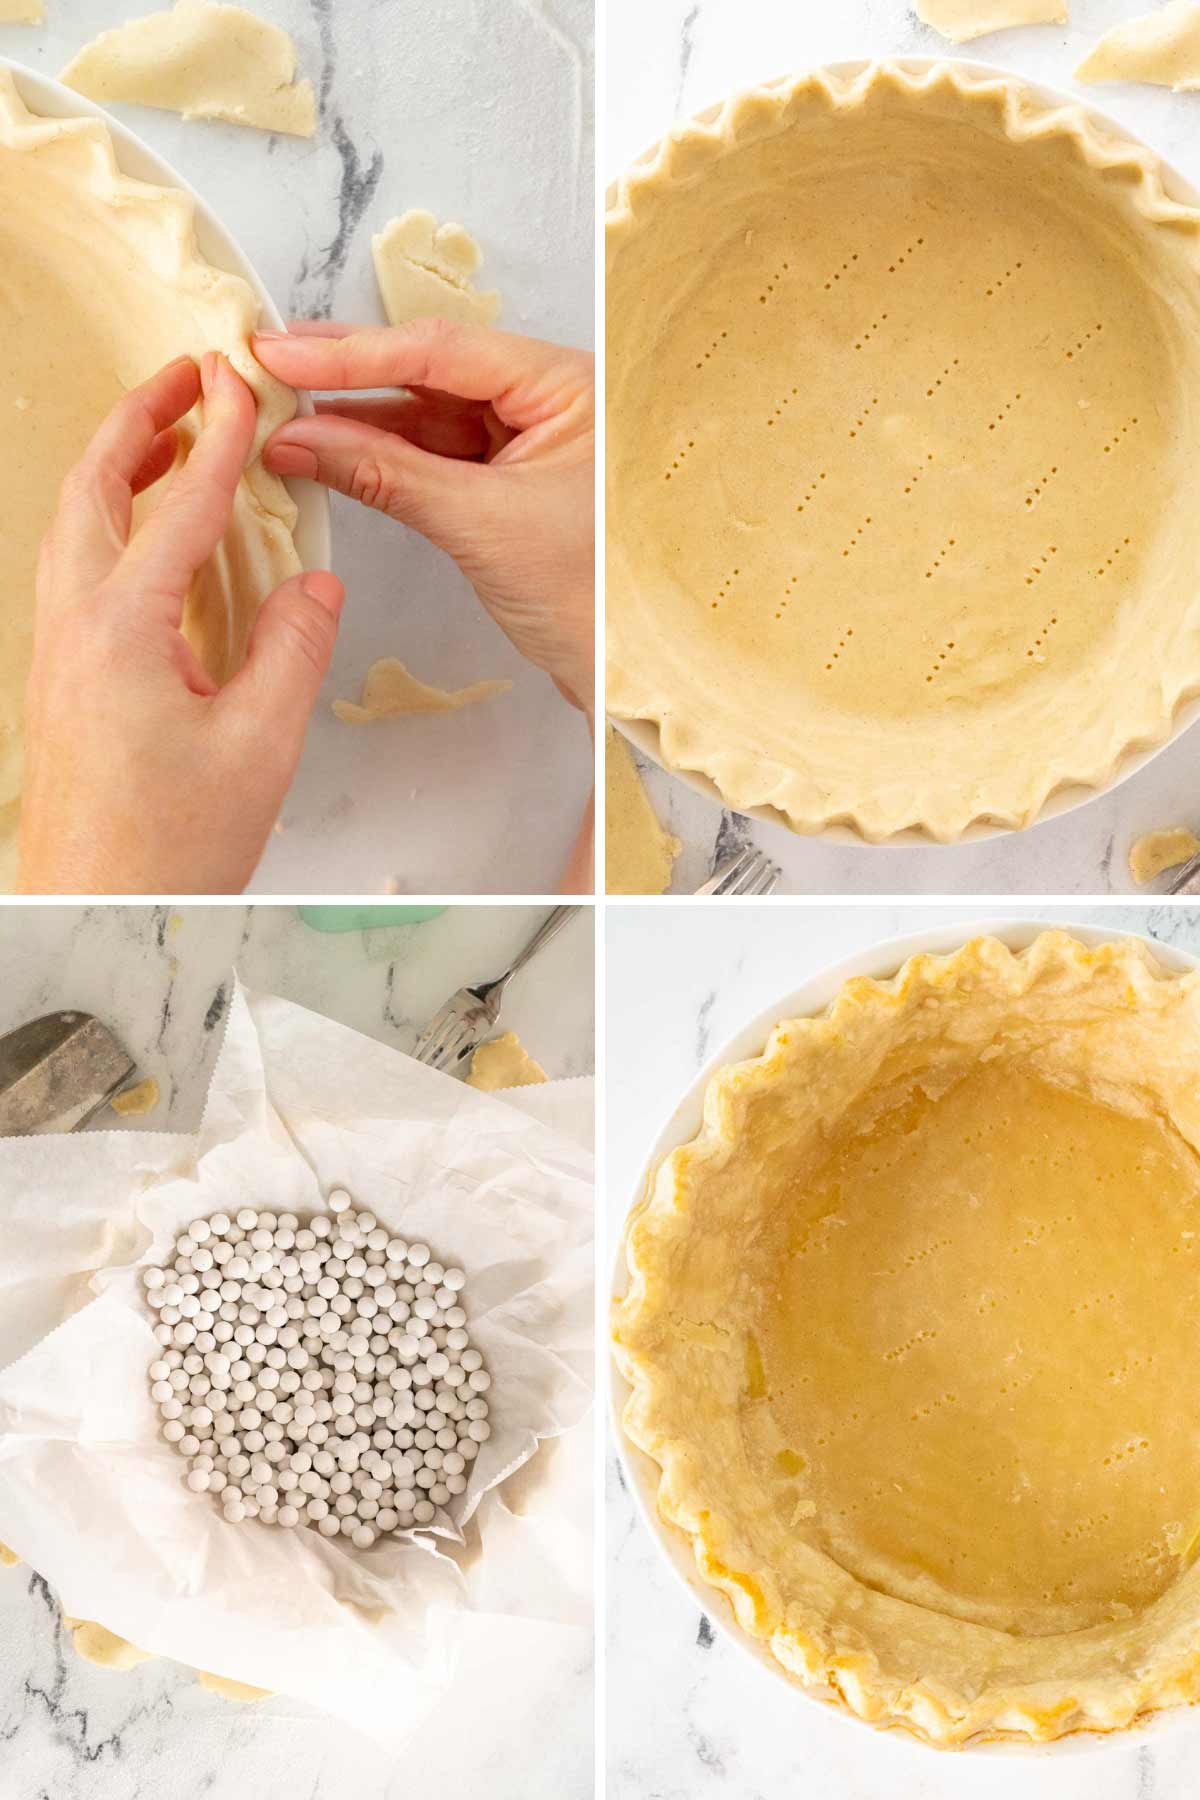 Pinching the edges of the dough and par baking the pie.